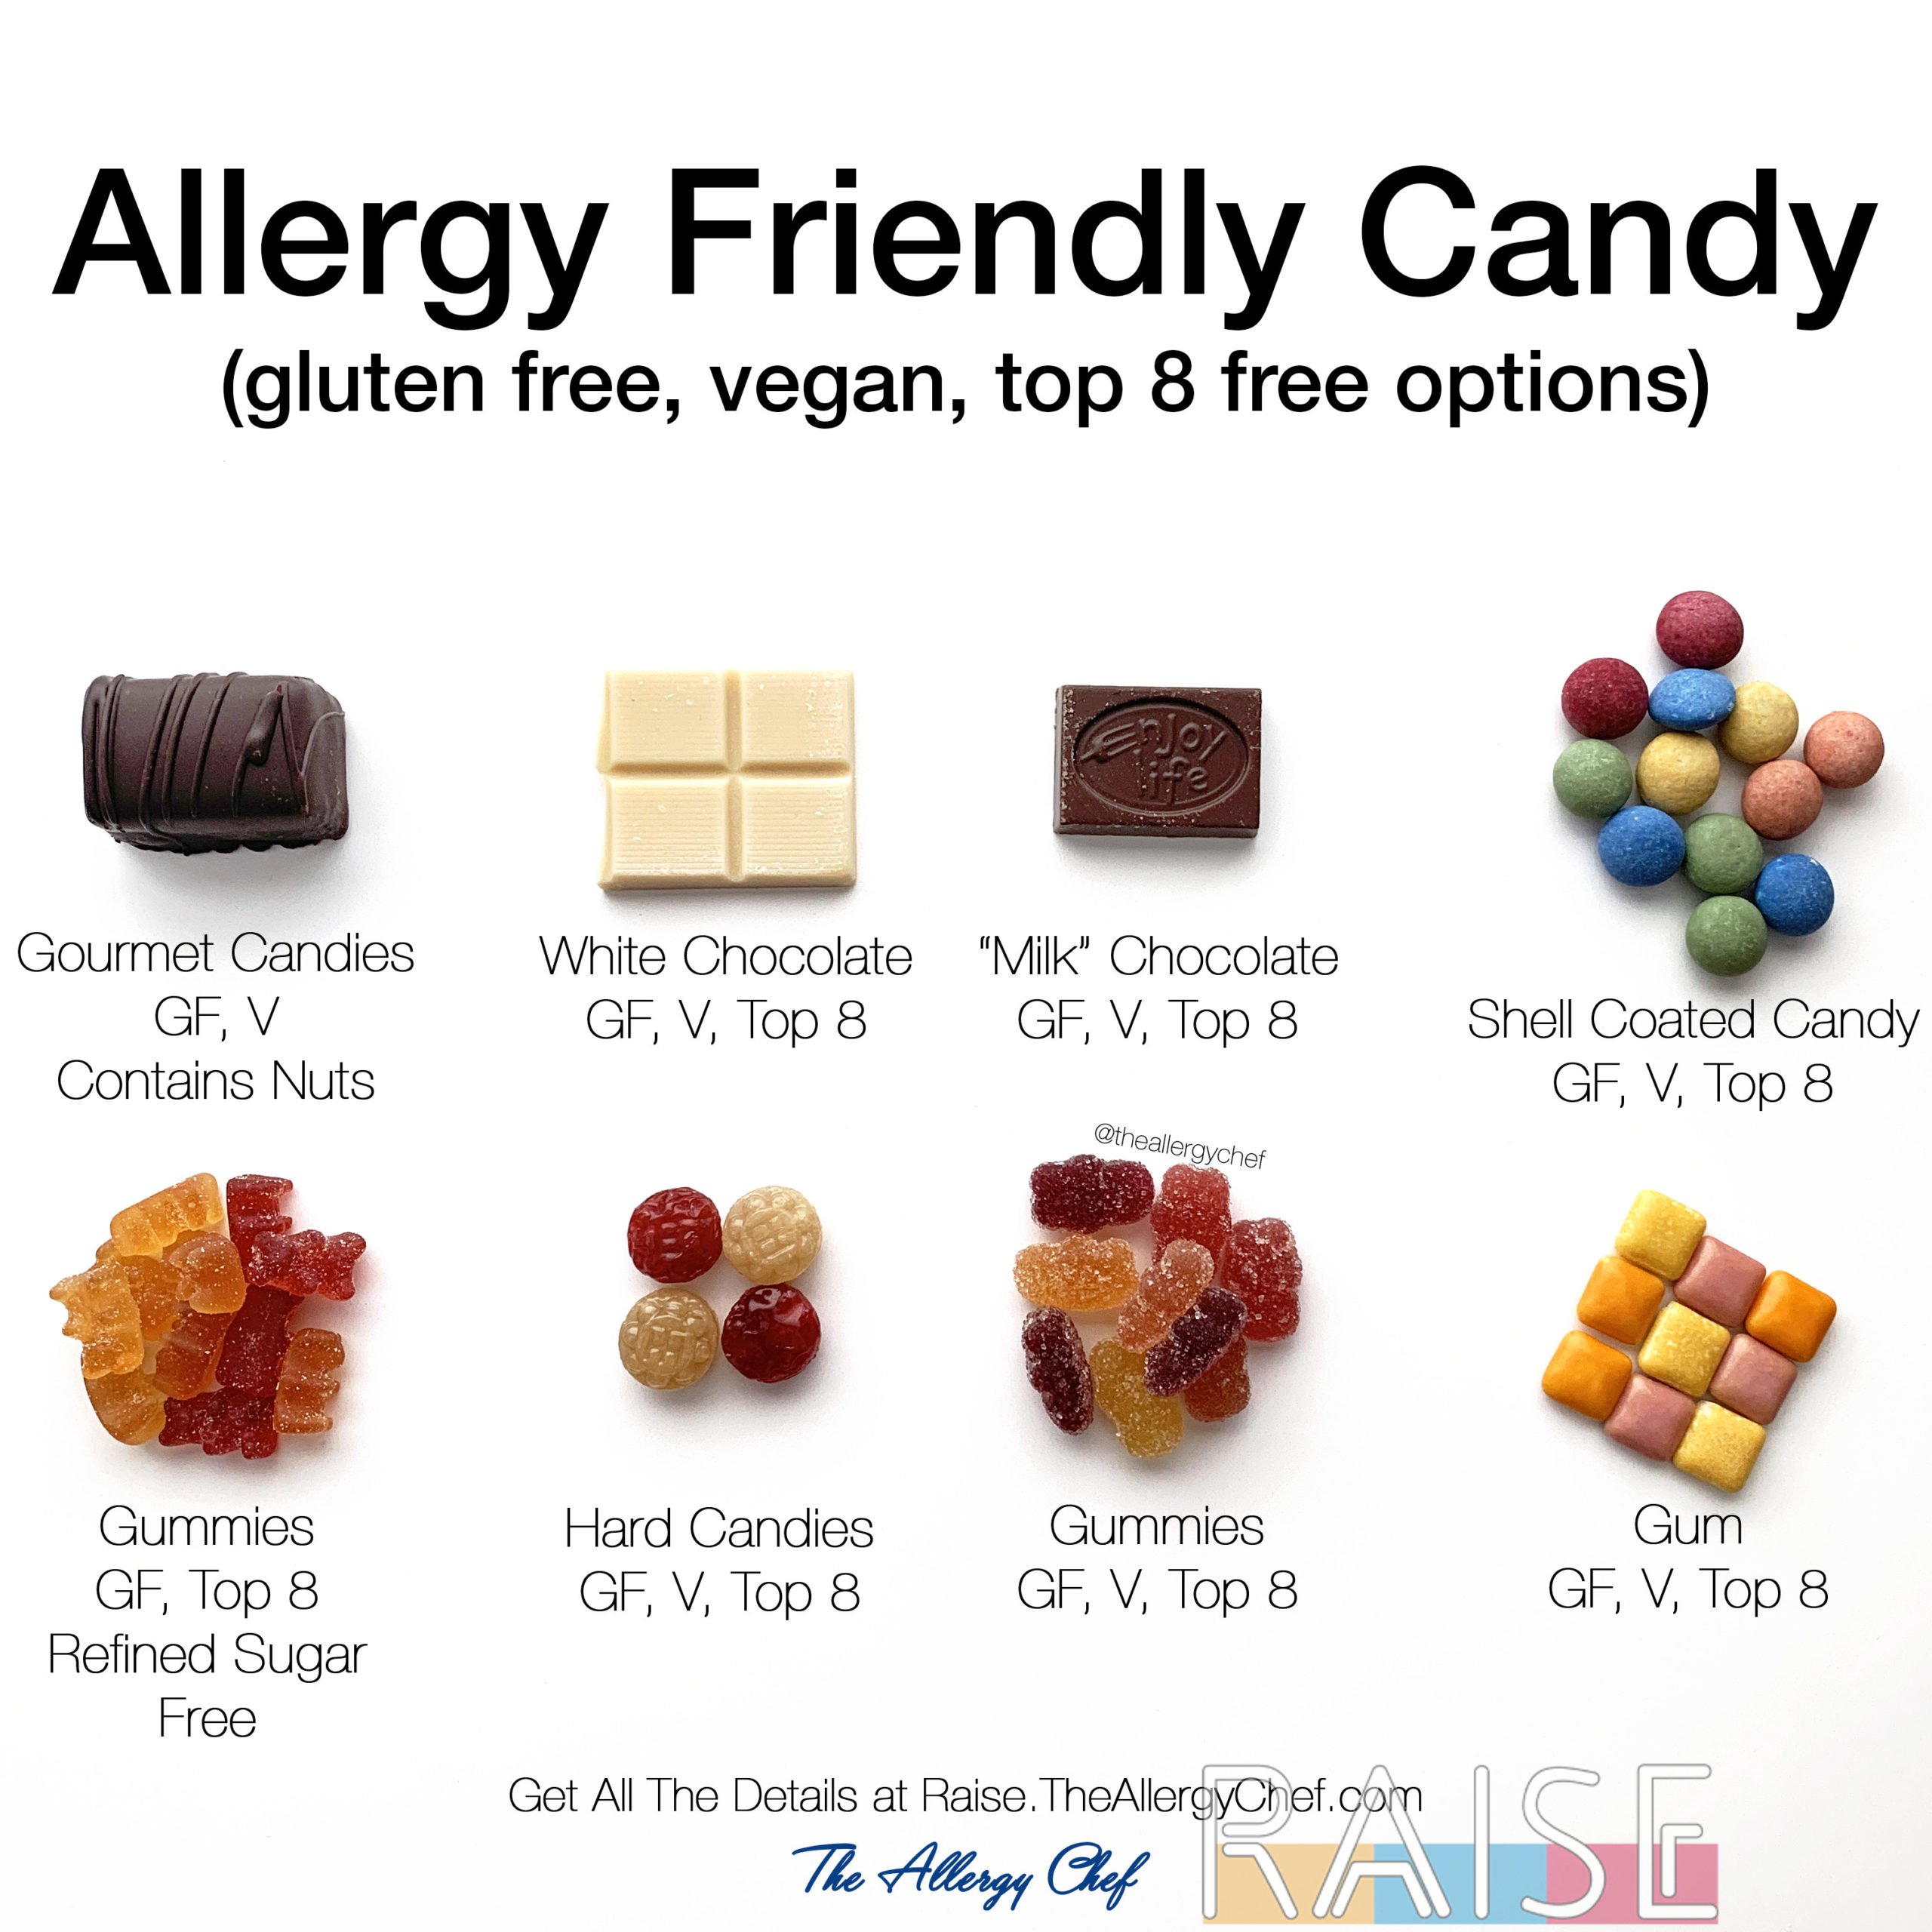 Gluten-Free Candy: What Are My Options?